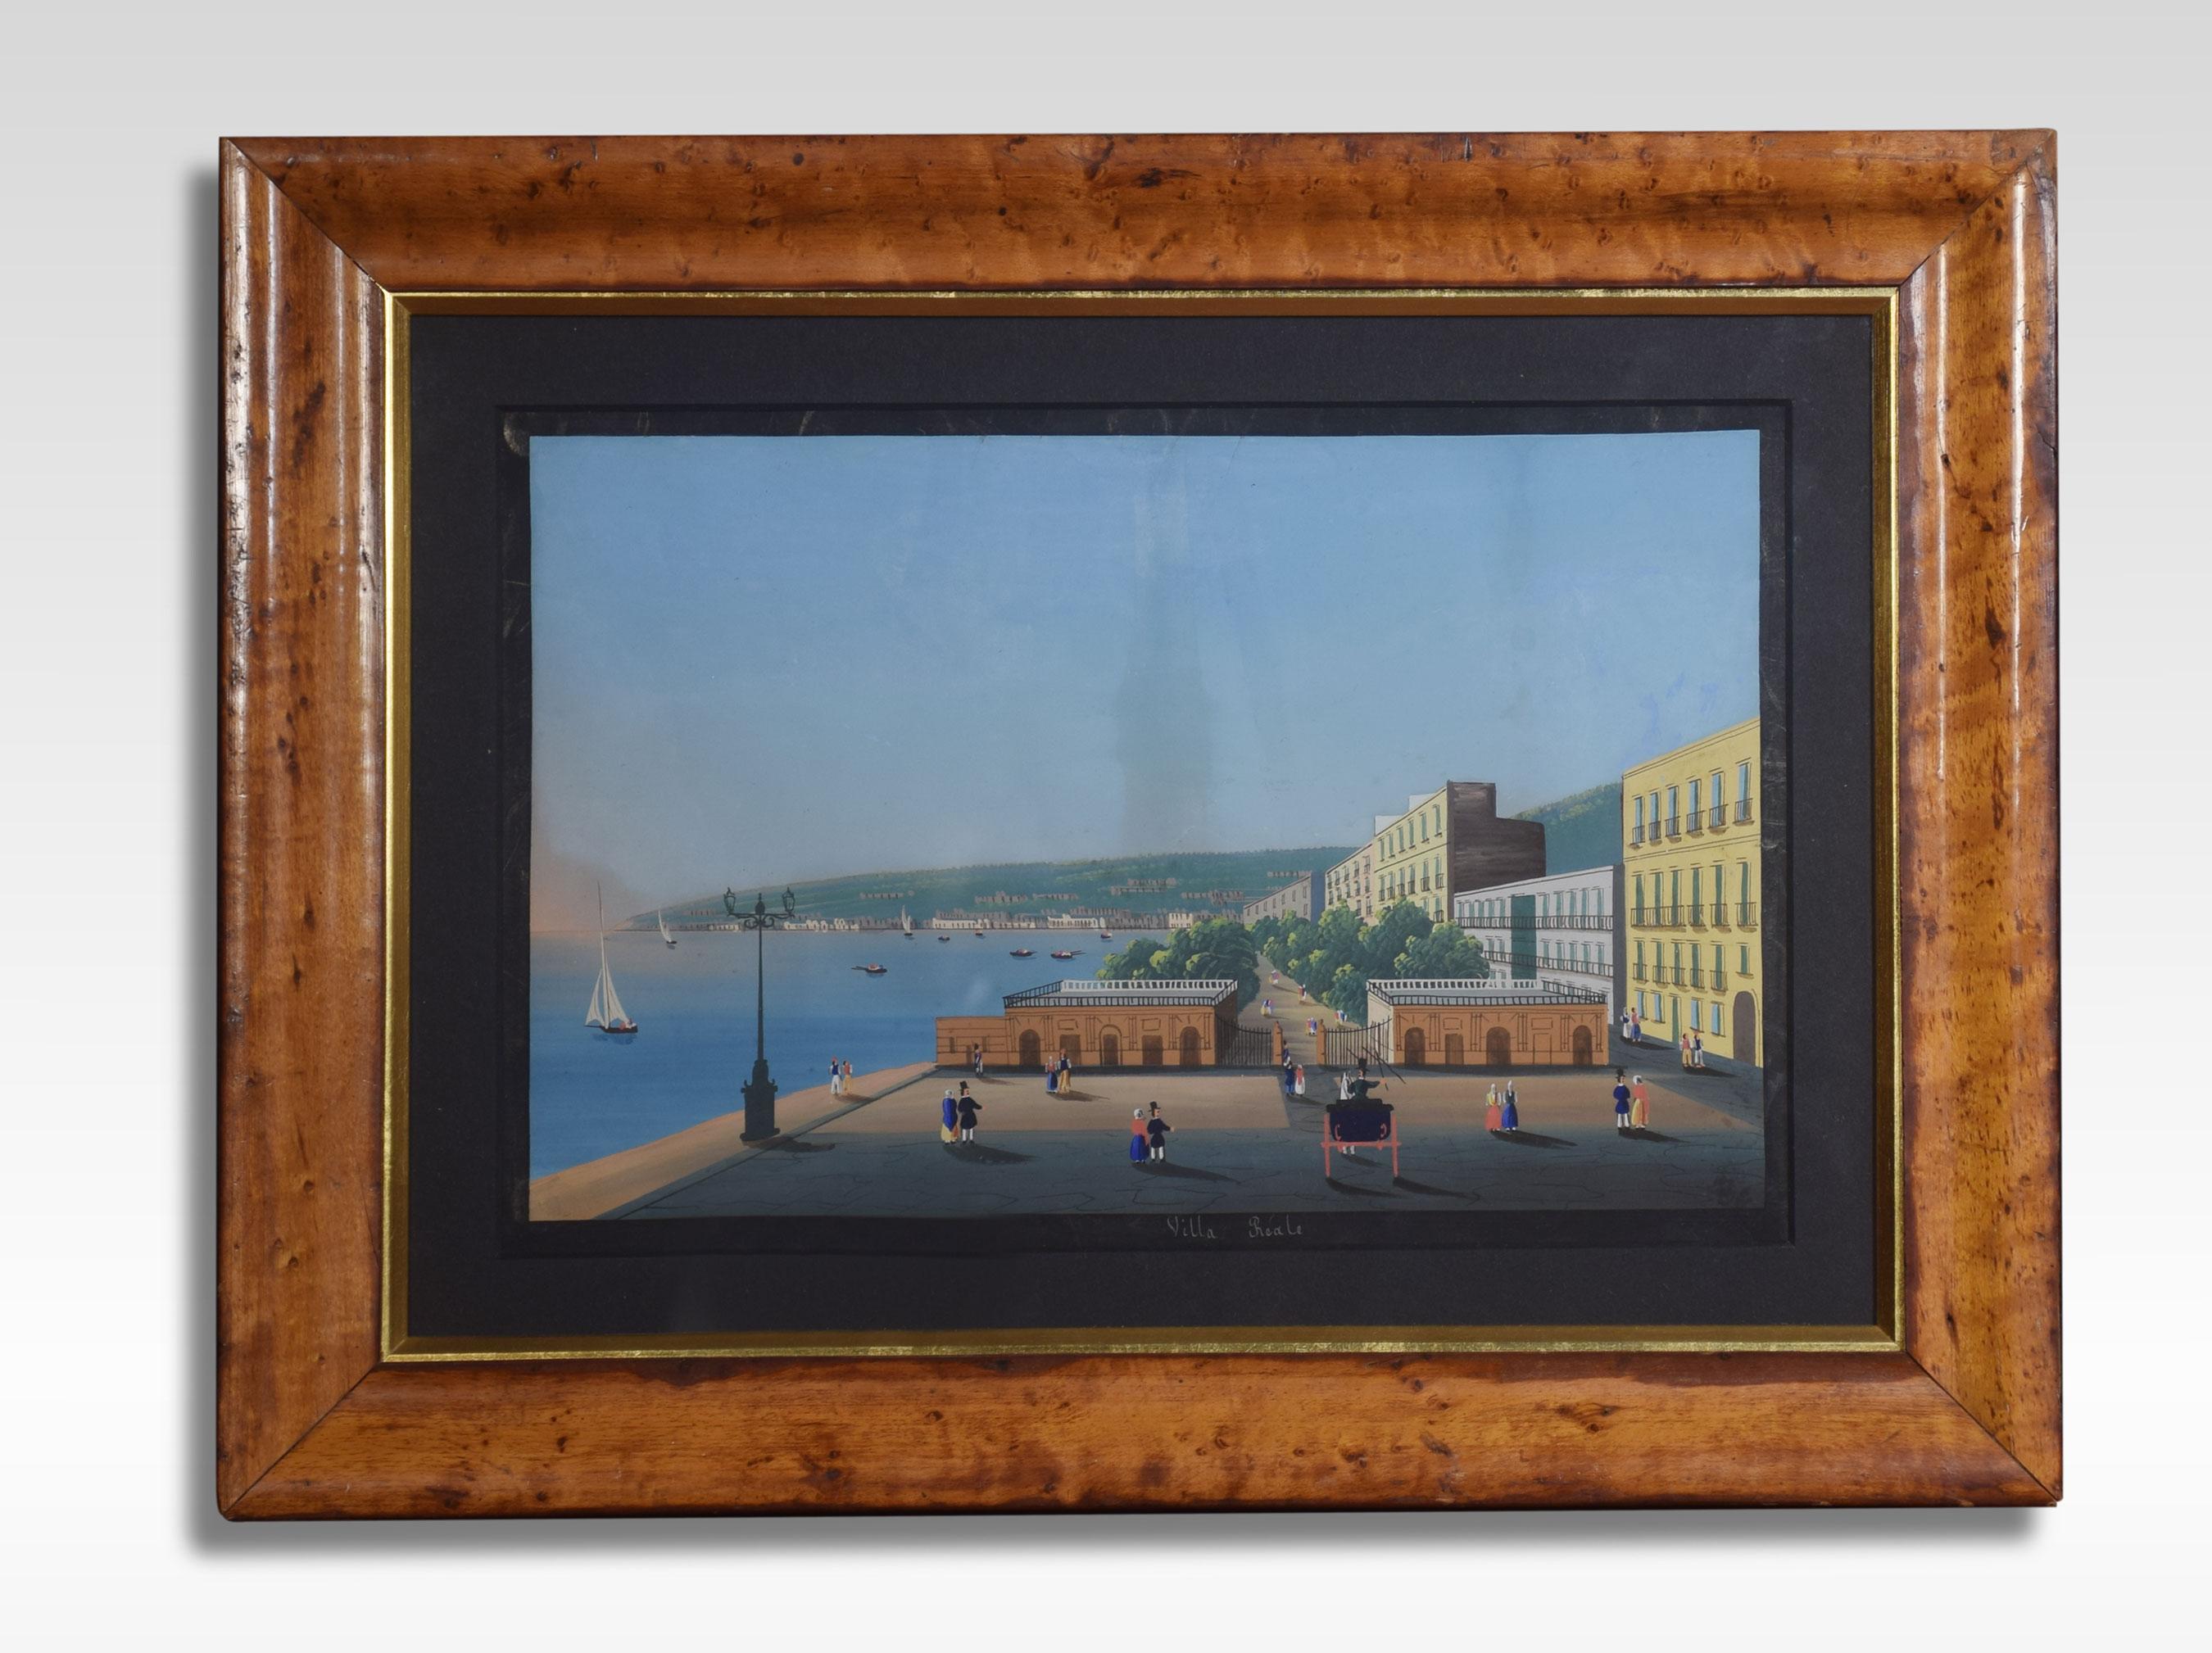 Pair of framed glazed Neapolitan gouache paintings, Napoli da Posillipo and Villa Reale in original maple frames.
Dimensions:
Height 16 inches
Width 21 inches
Depth 1 inches.